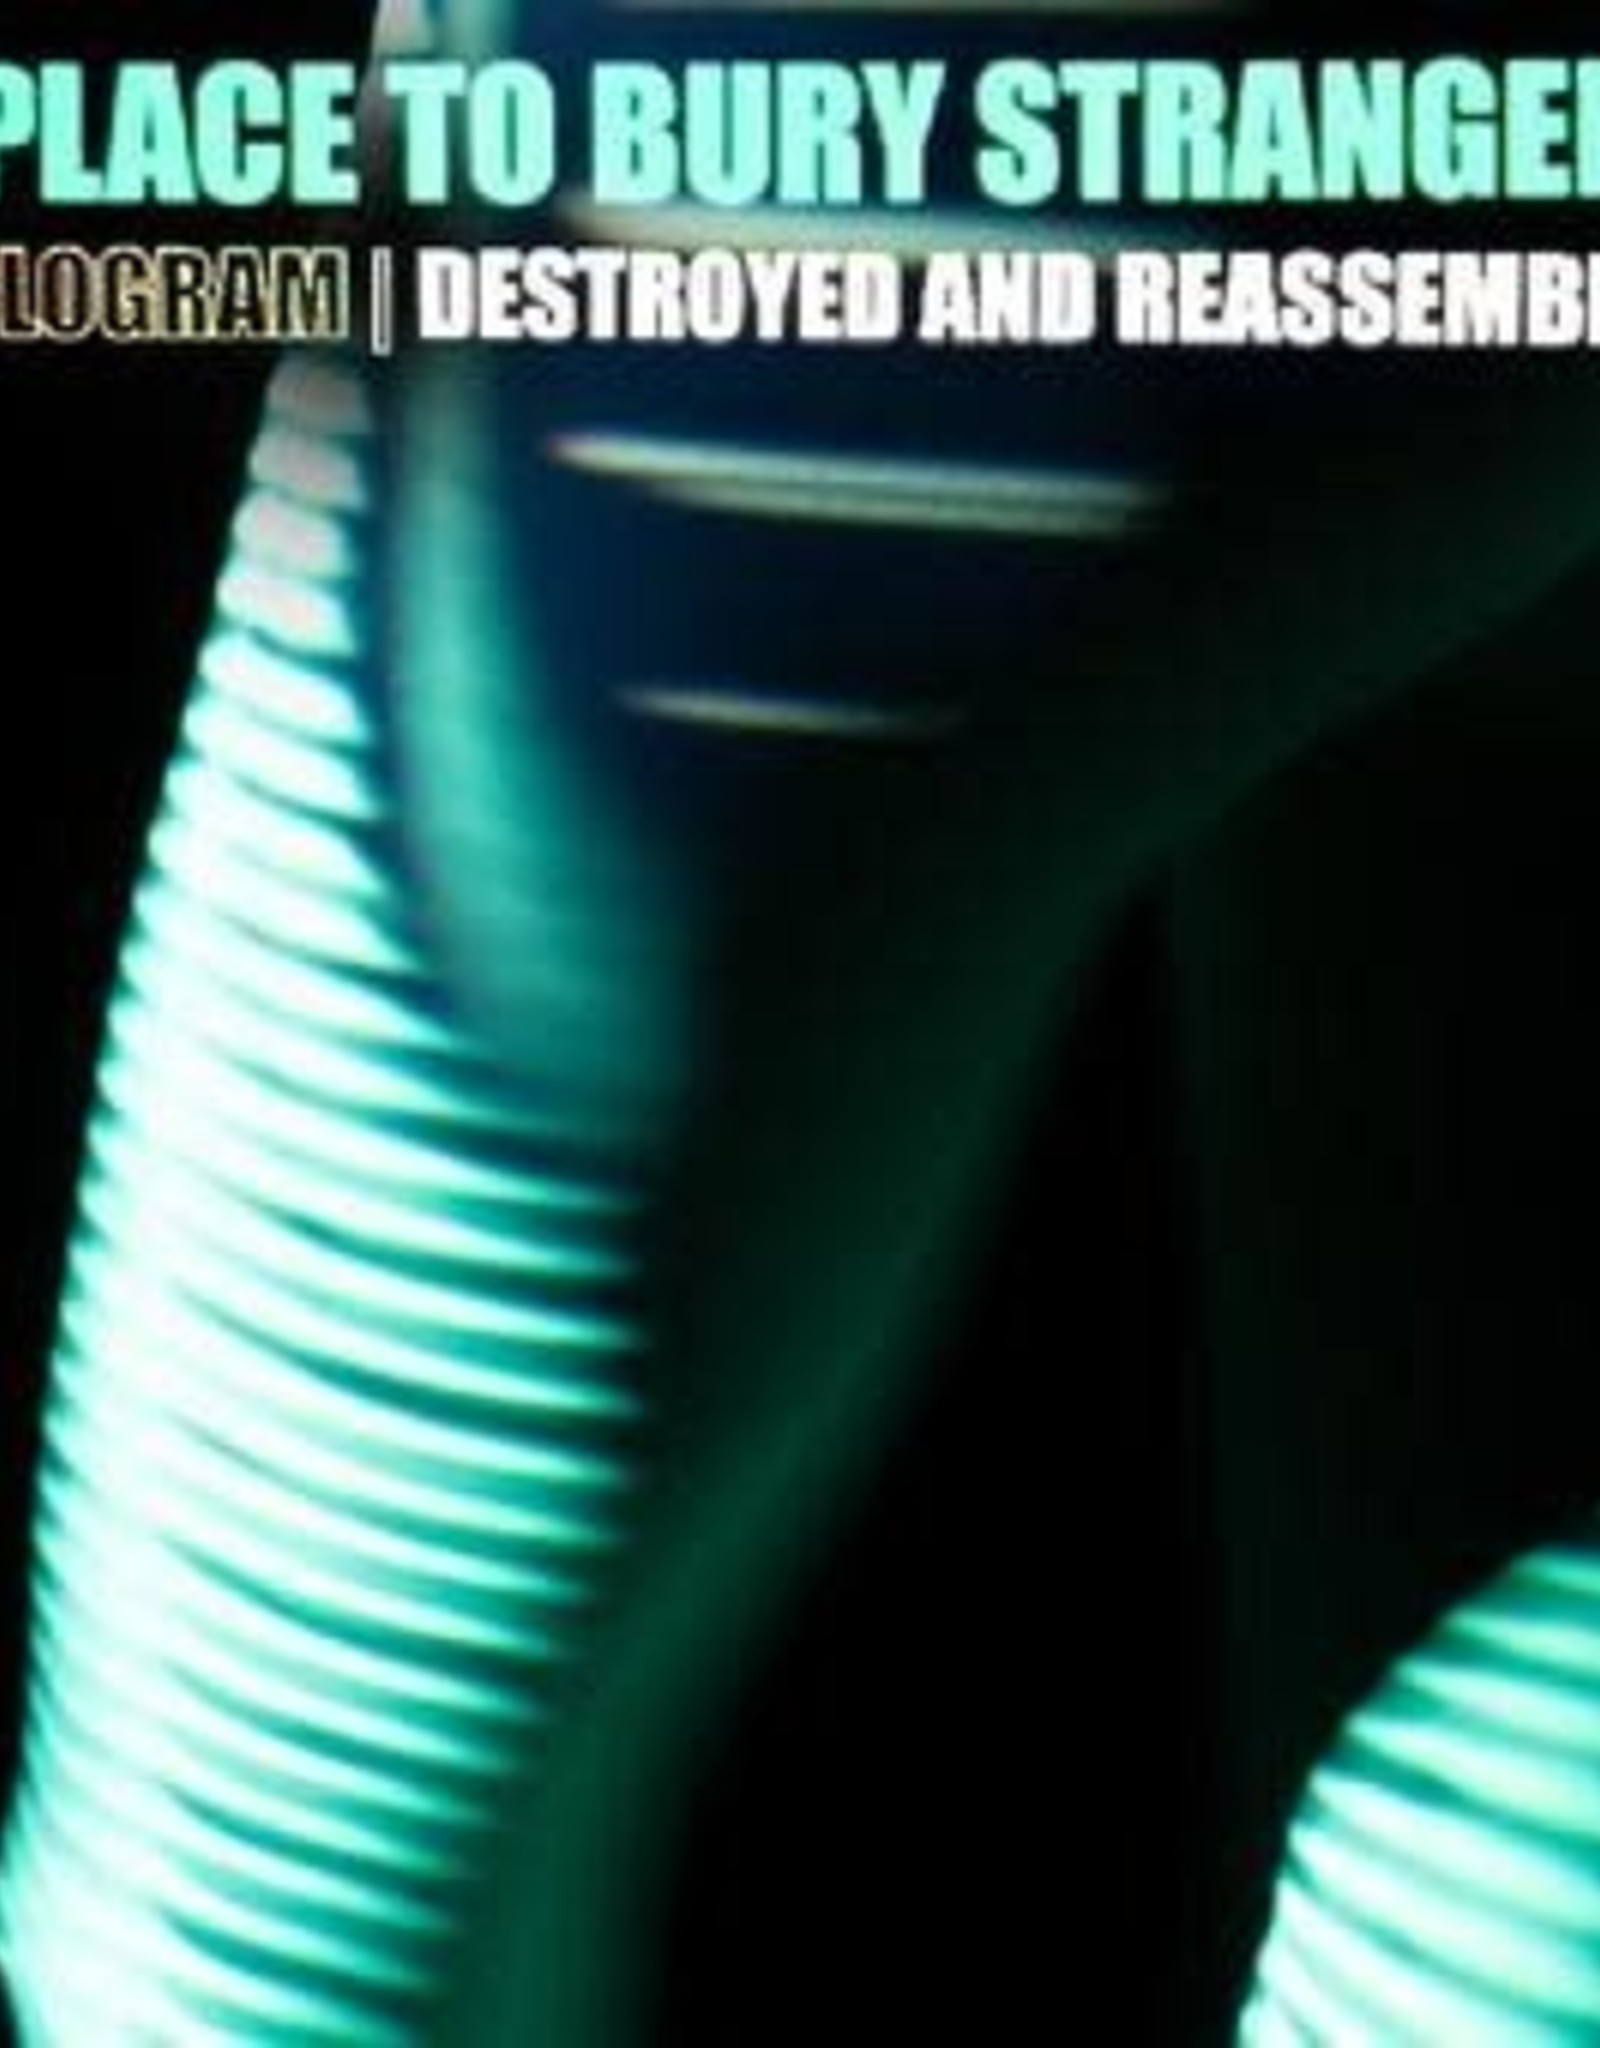 A Place To Bury Strangers - Hologram - Destroyed & Reassembled (Remix Album)(RSDBF 2021)